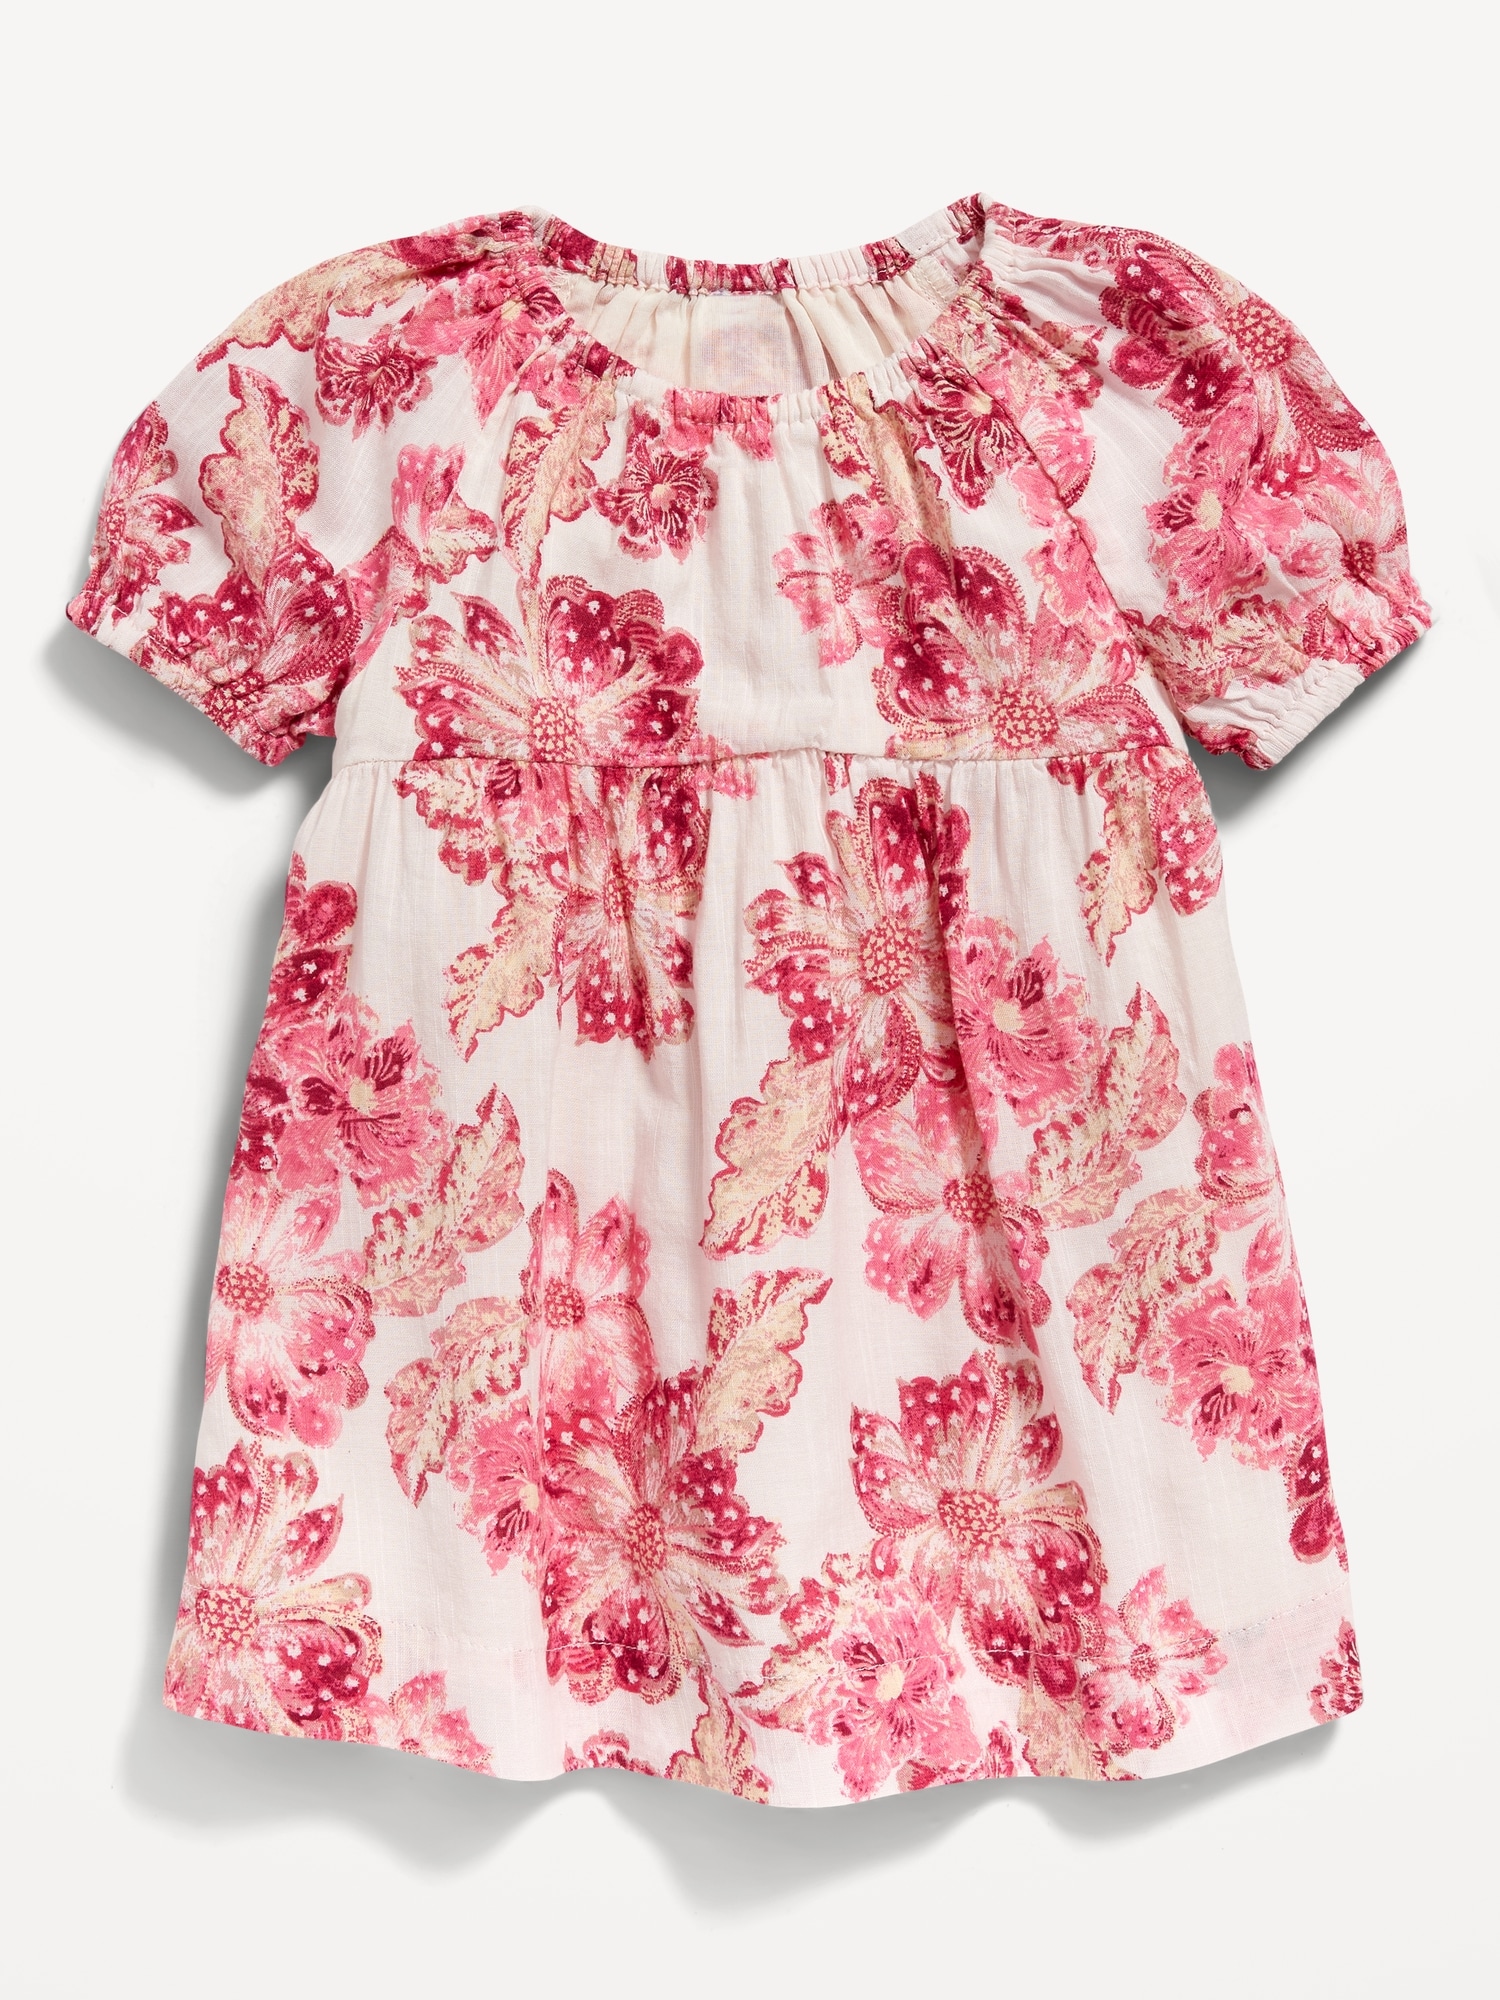 Matching Puff-Sleeves Floral-Print Dress for Baby | Old Navy